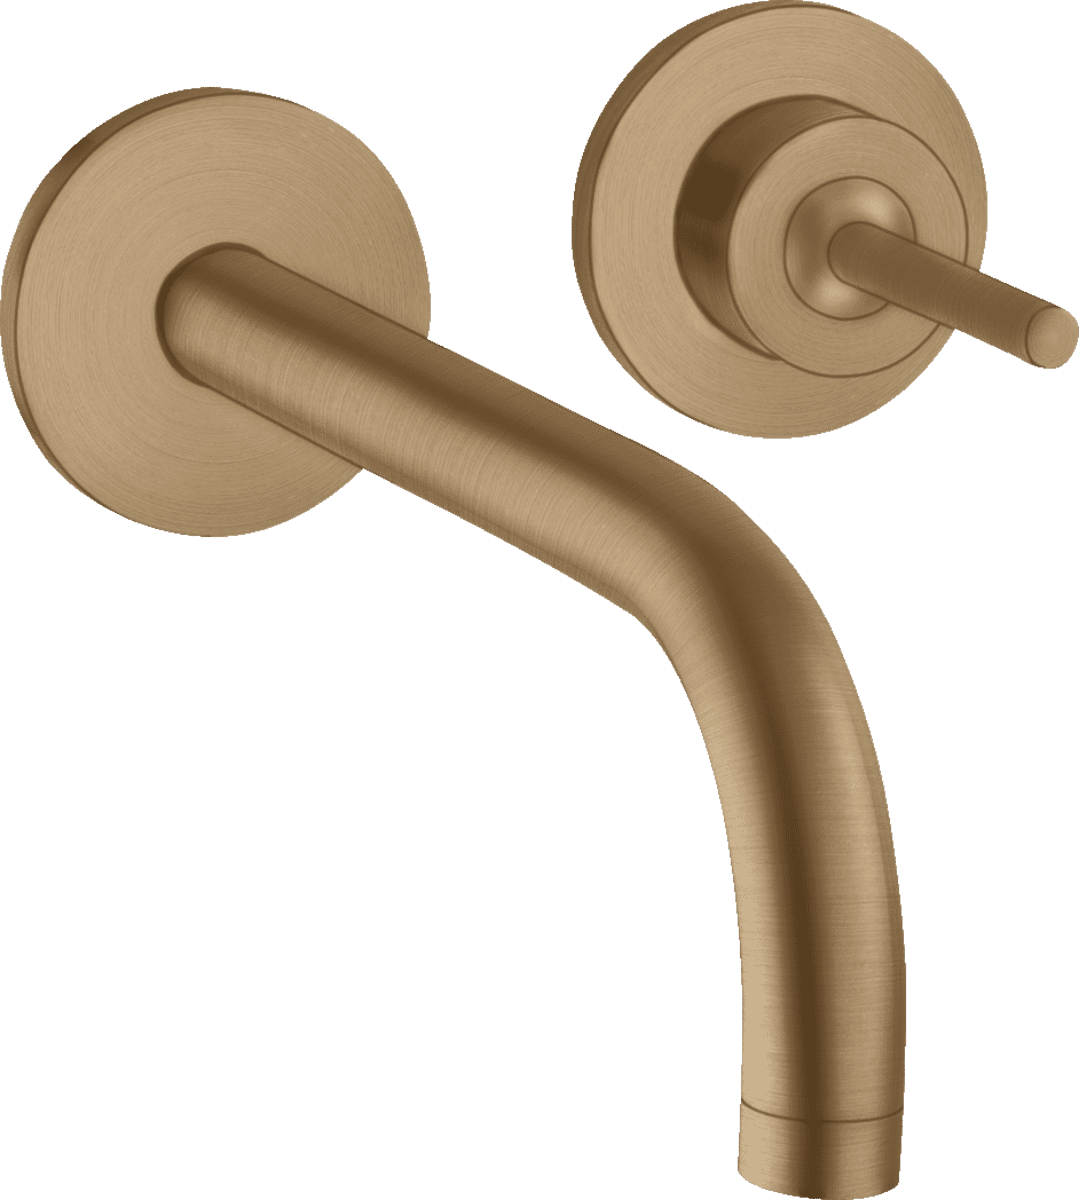 Picture of HANSGROHE AXOR Uno Single lever basin mixer for concealed installation wall-mounted with spout 225 mm and escutcheons #38116140 - Brushed Bronze